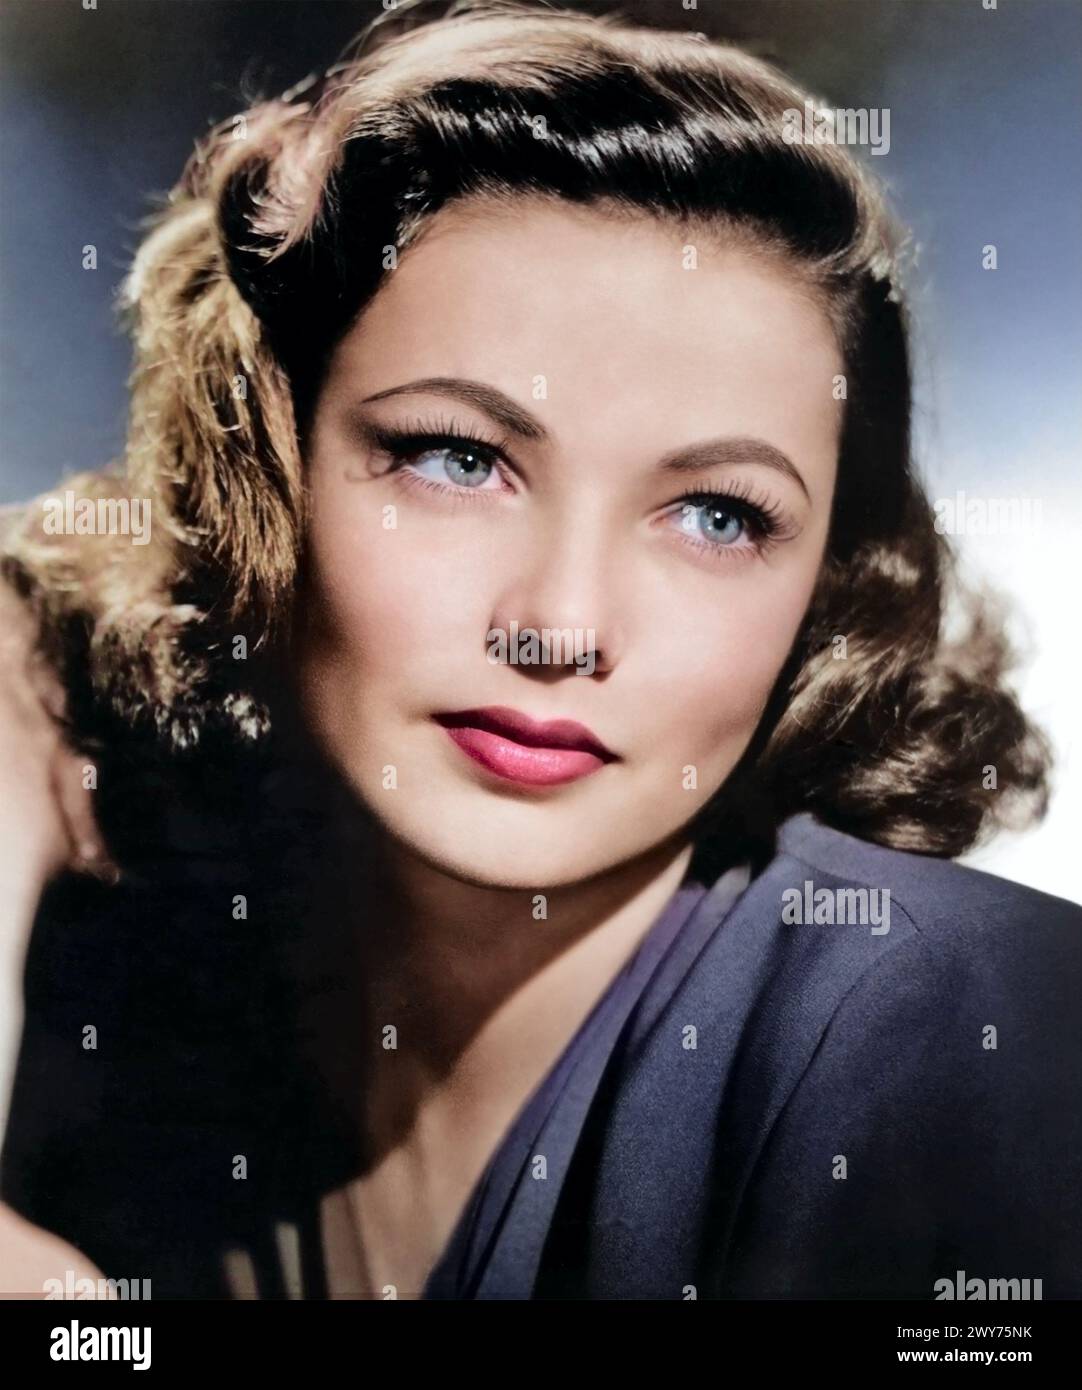 GENE TIERNEY (1920-1991) American film actress about 1948 Stock Photo